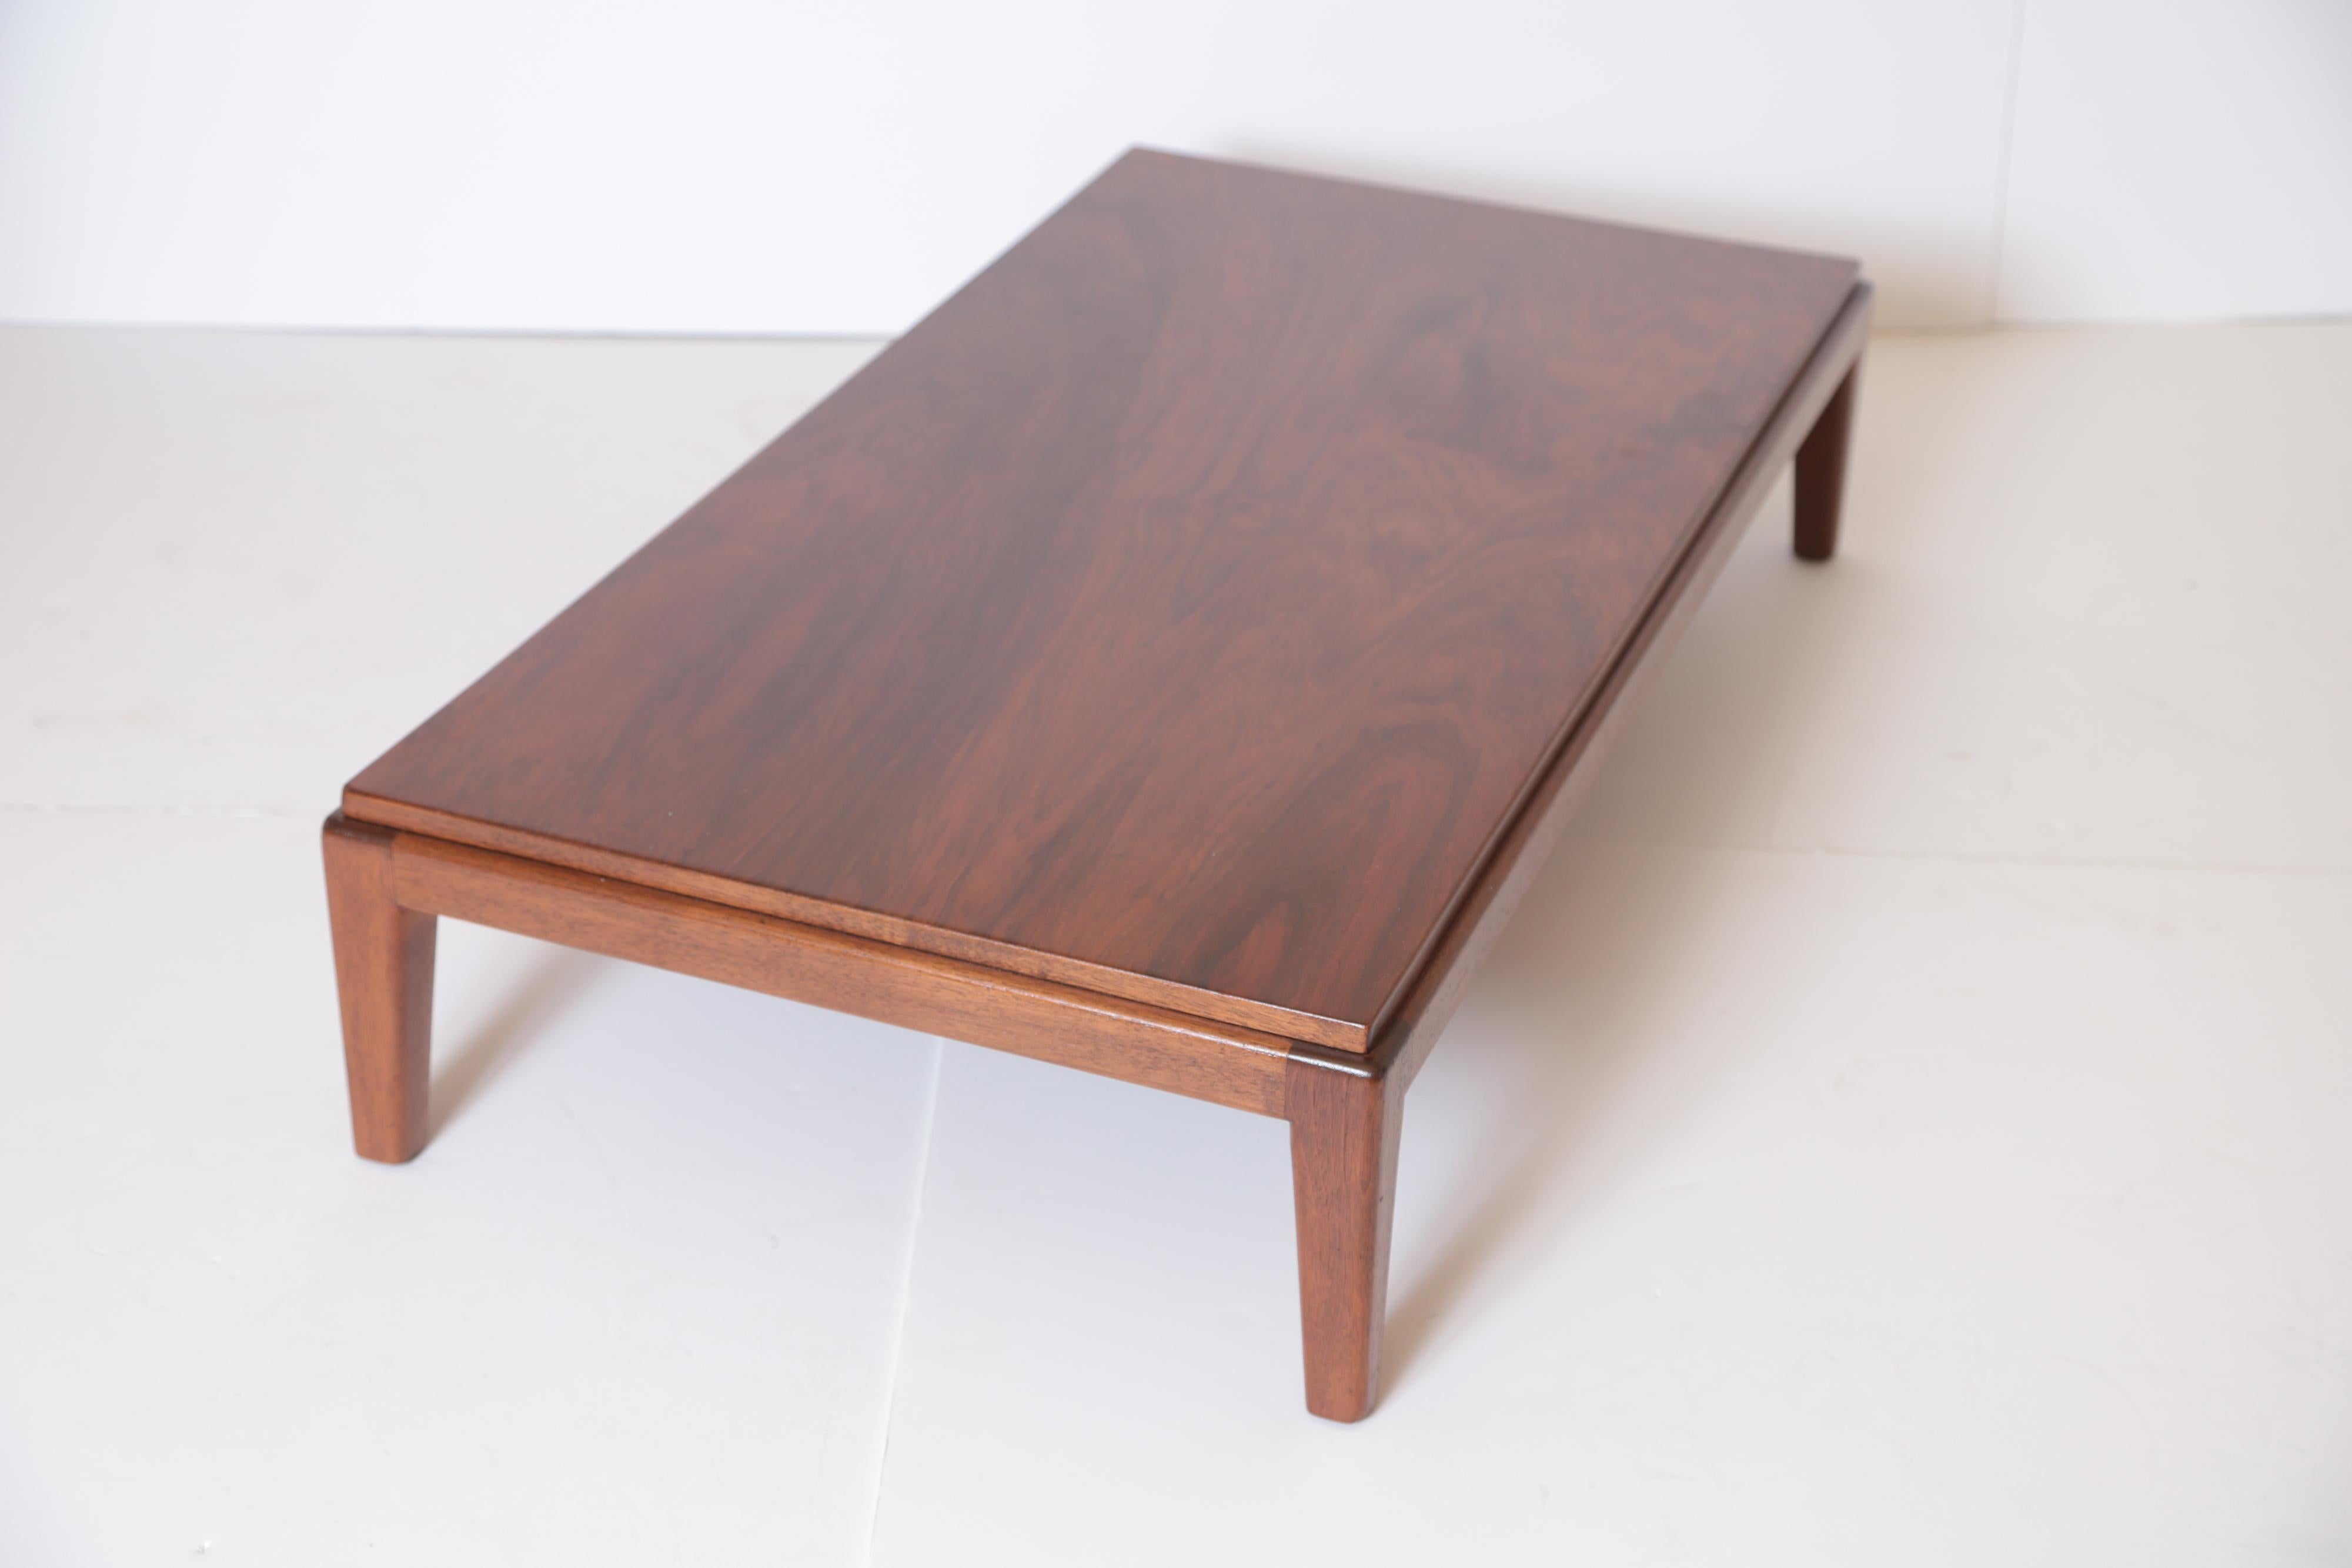 Art Deco Midcentury Low Coffee or Occasional Table by Schmieg & Kotzian For Sale 2